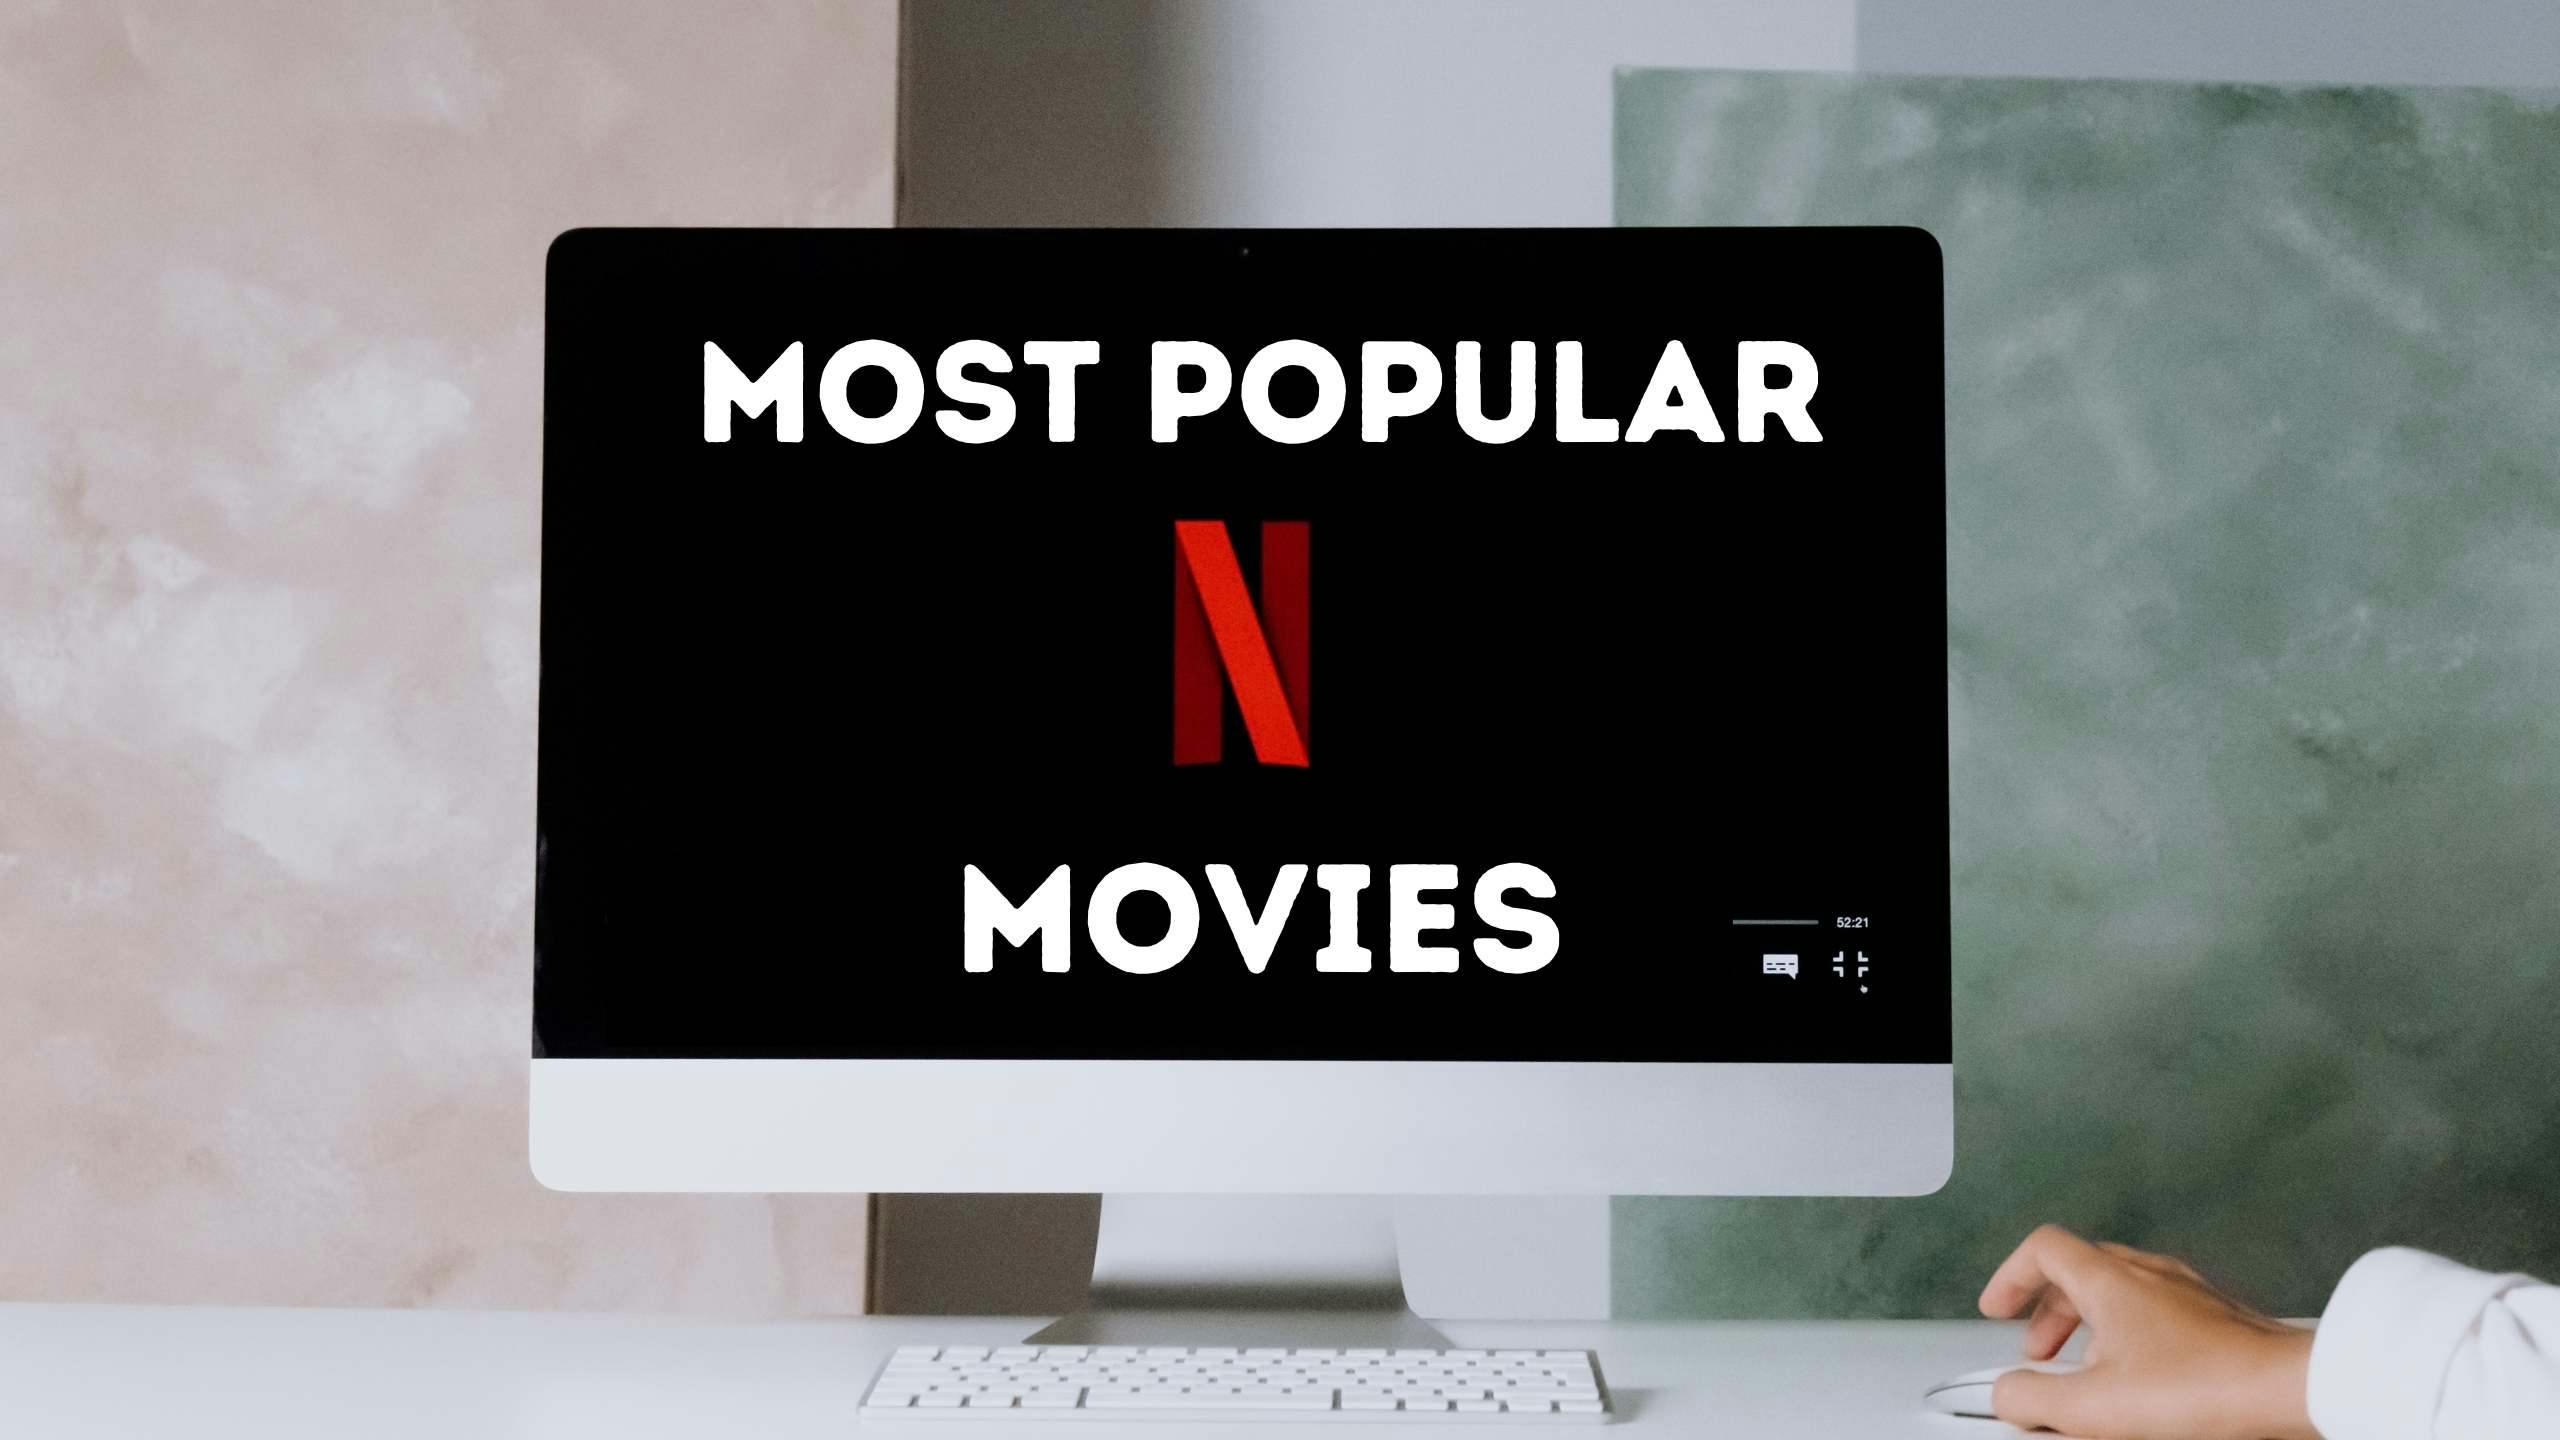 List of Most Popular Movies on Netflix as of 2021